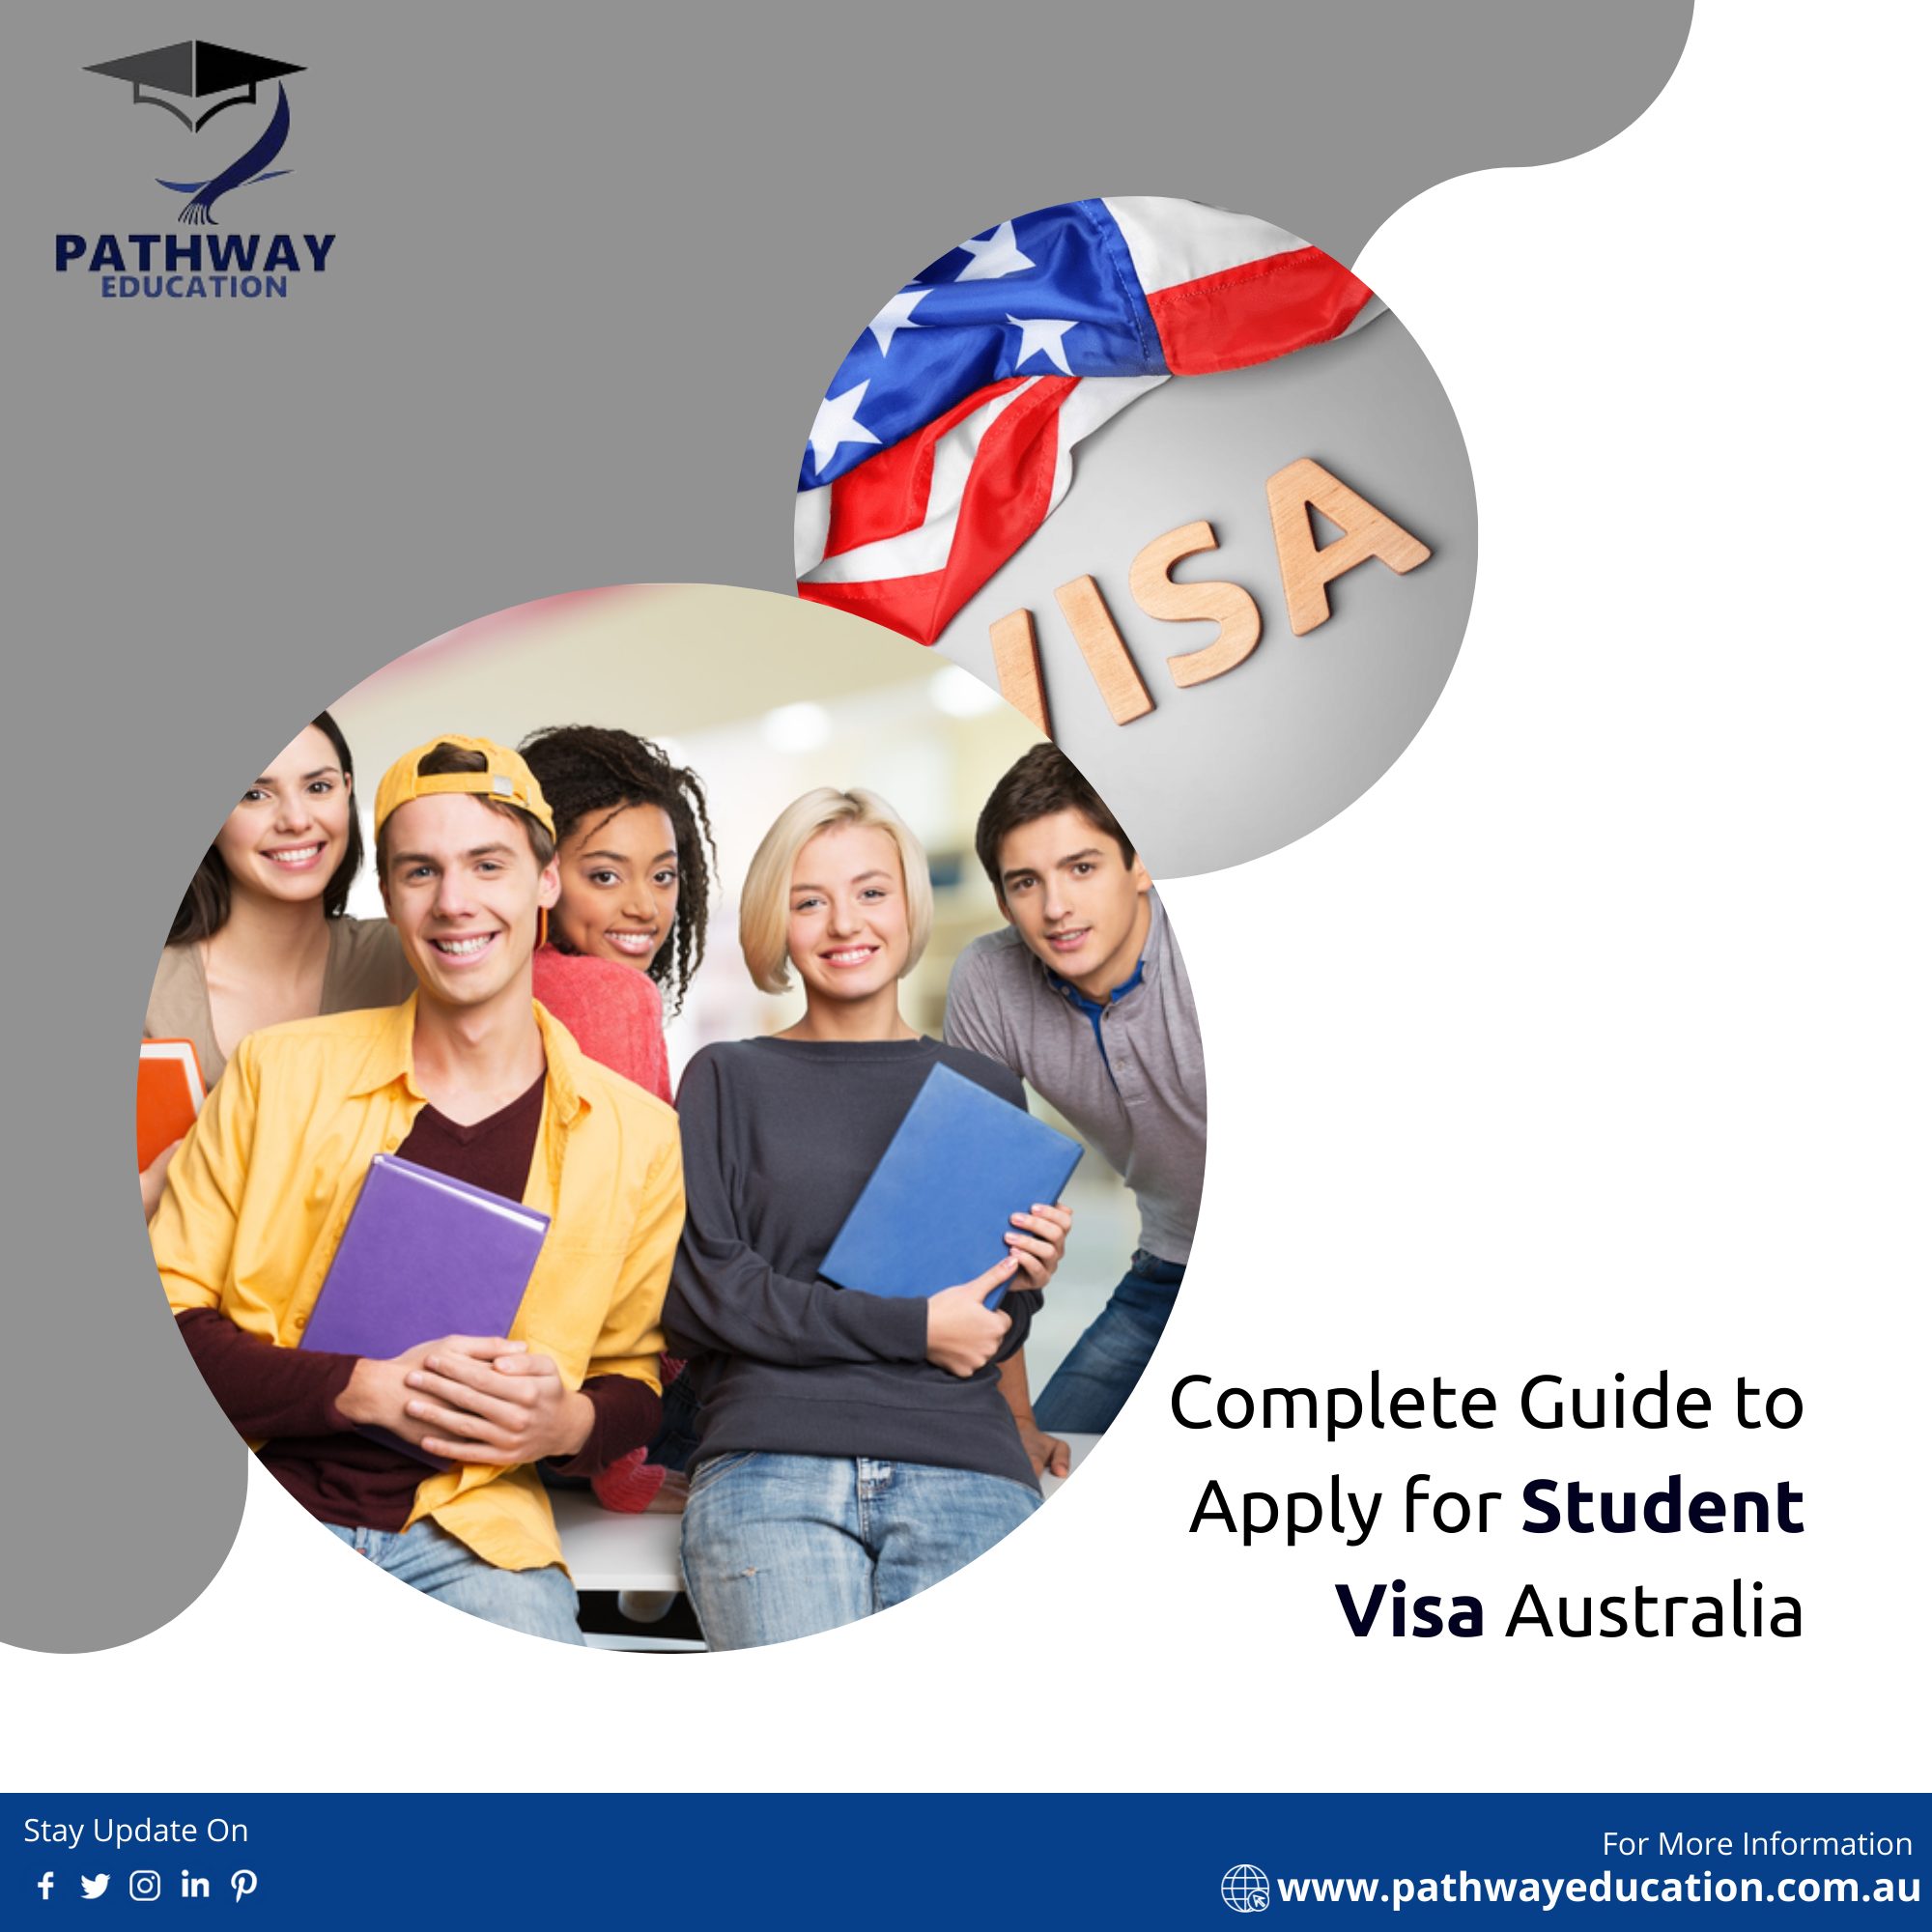 Complete Guide to Apply for Student Visa Australia